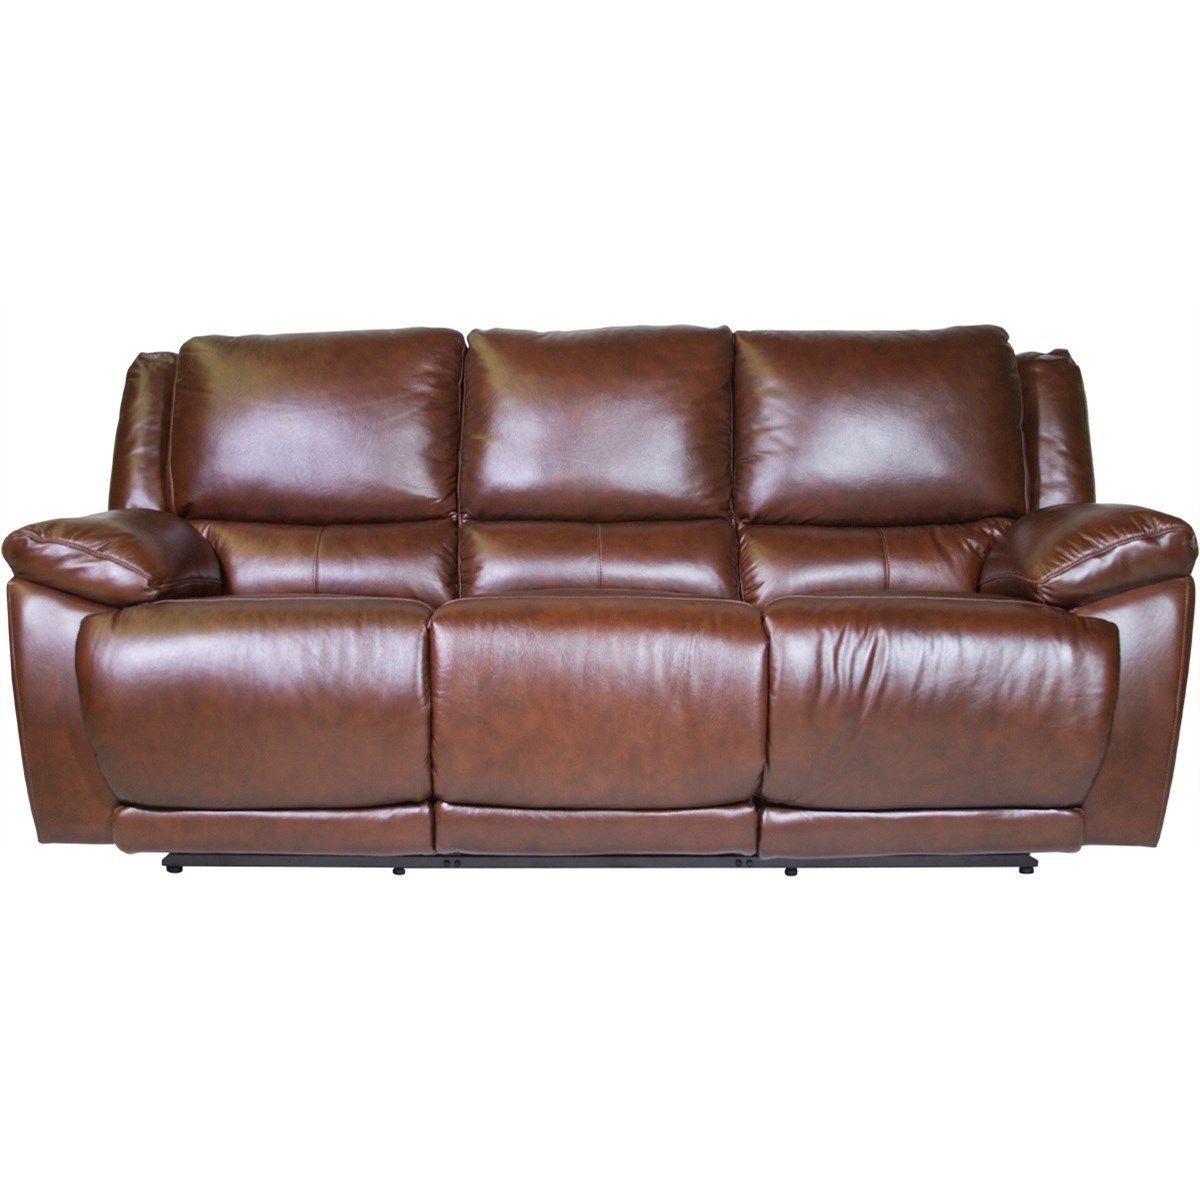 Futura Leather Curtis Power Reclining Sofa | Homeworld Pertaining To Nolan Leather Power Reclining Sofas (View 6 of 15)